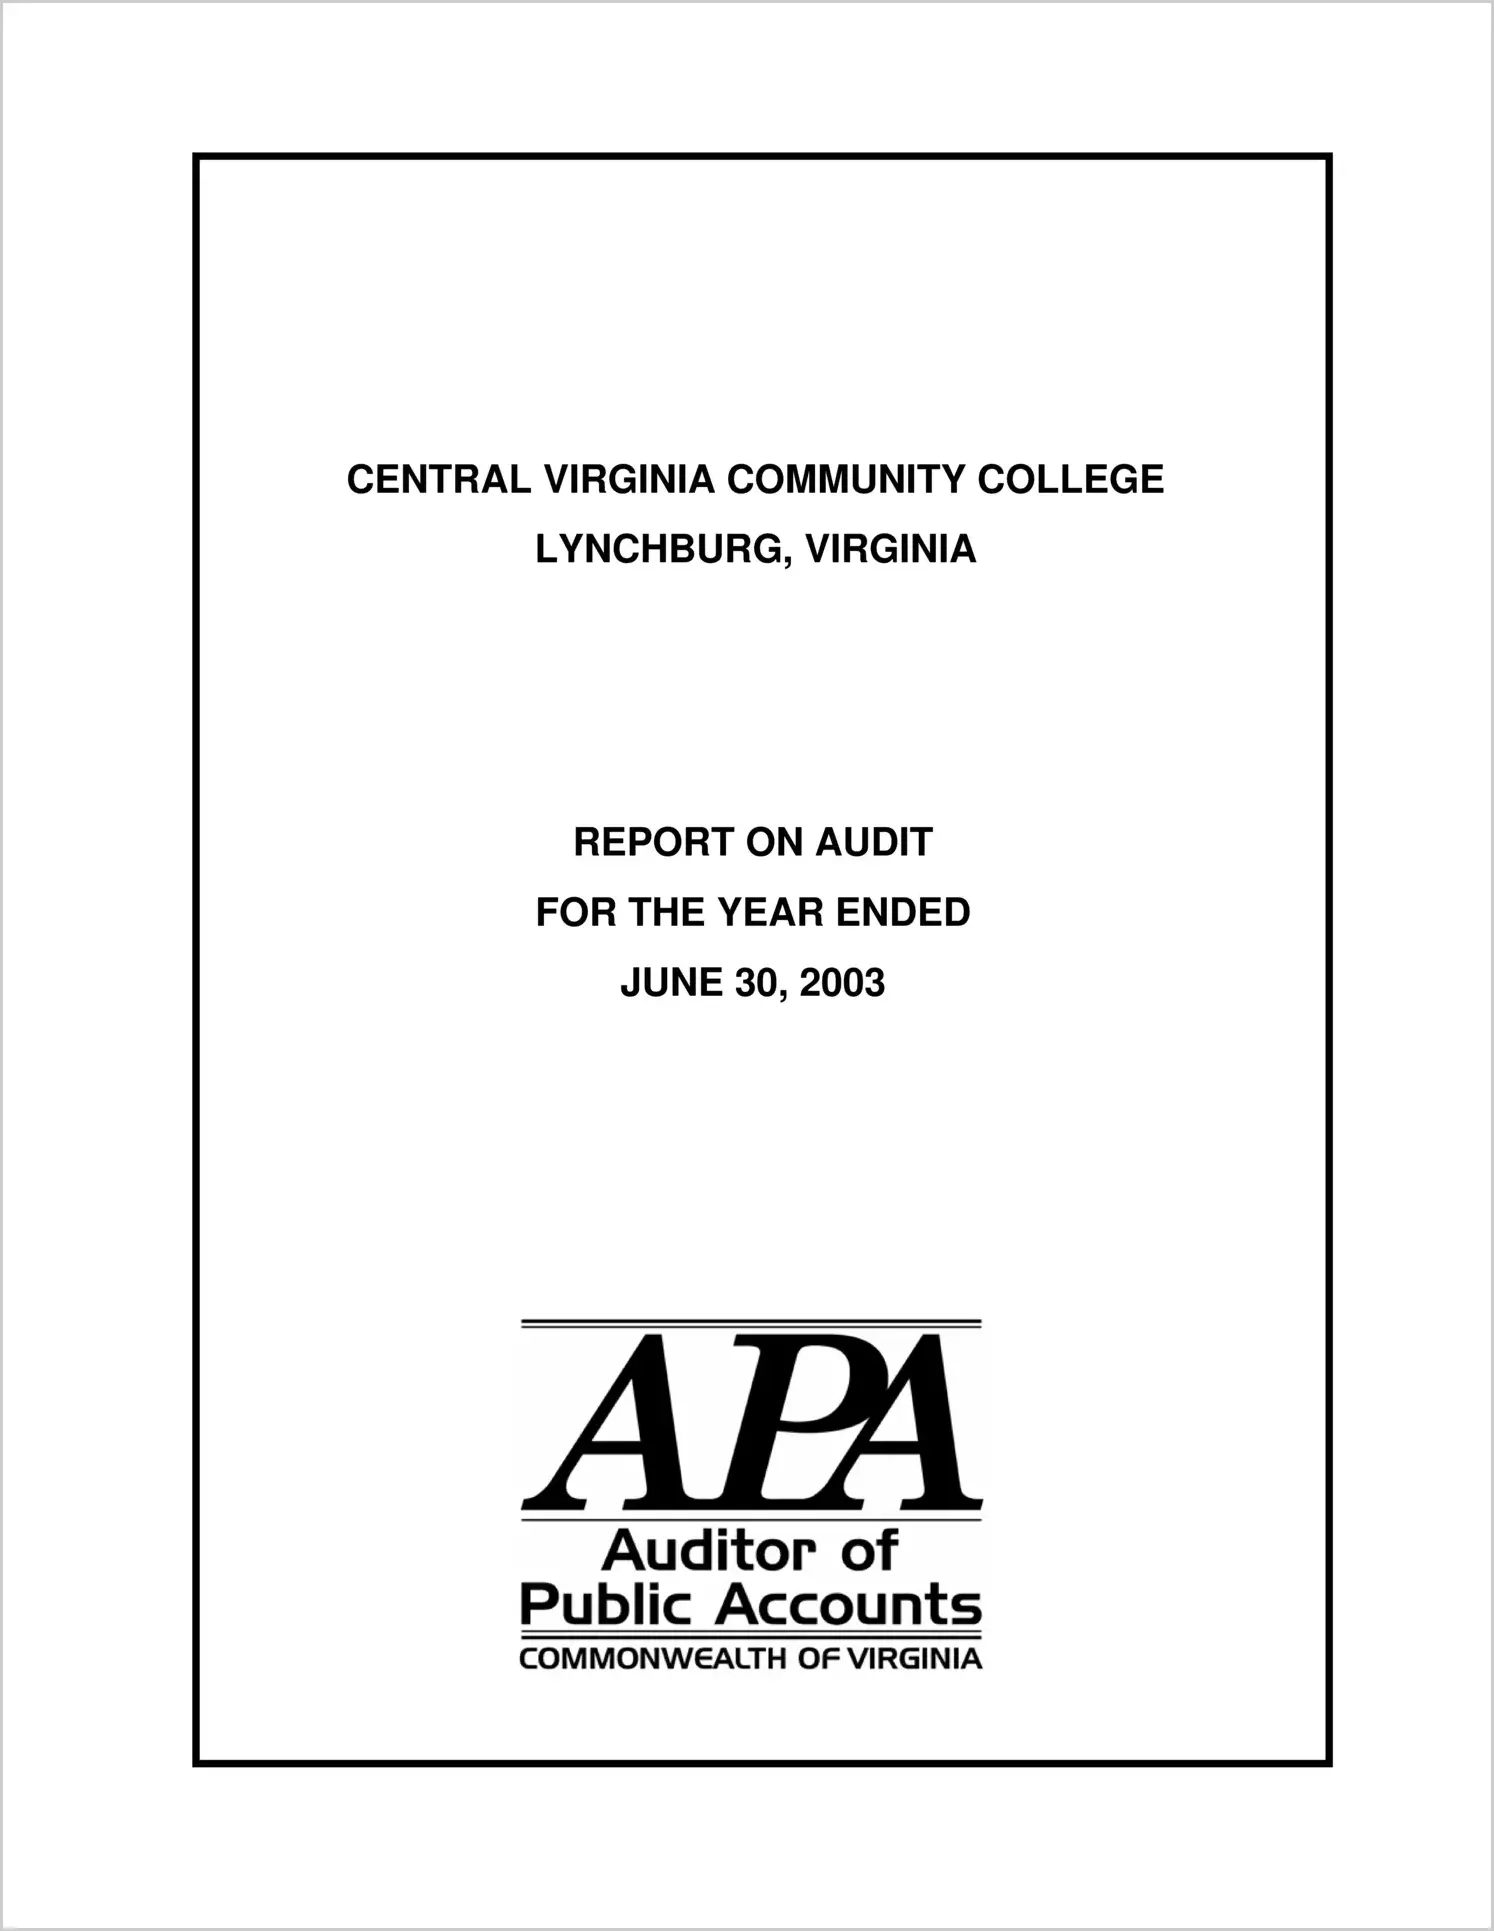 Central Virginia Community College for the year ended June 30, 2003